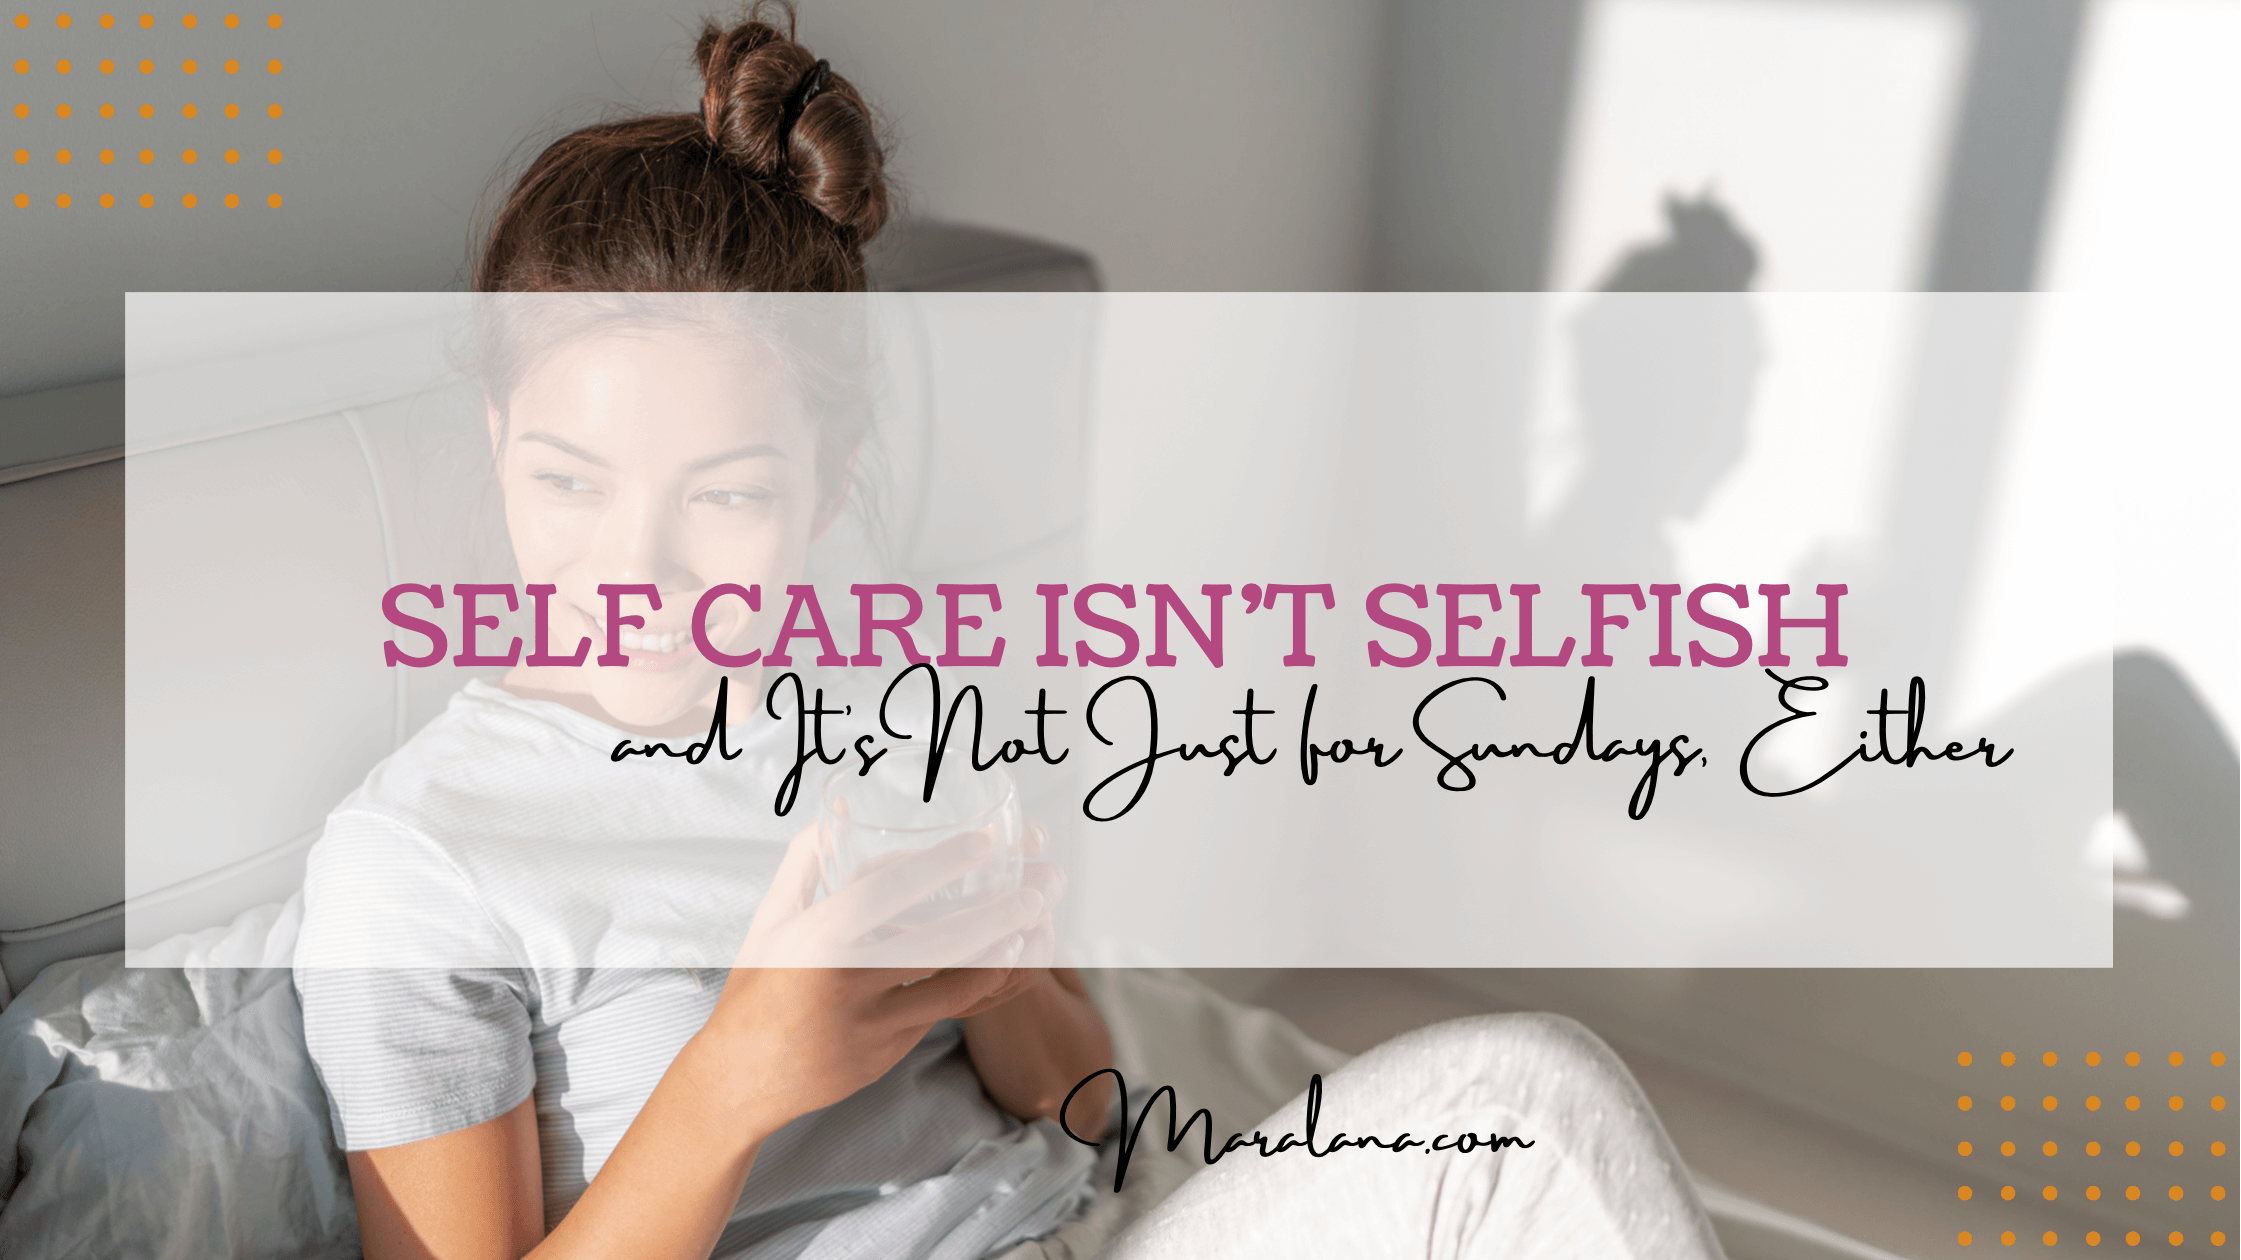 Selfcare isn’t Selfish and It’s Not Just for Sundays, Either